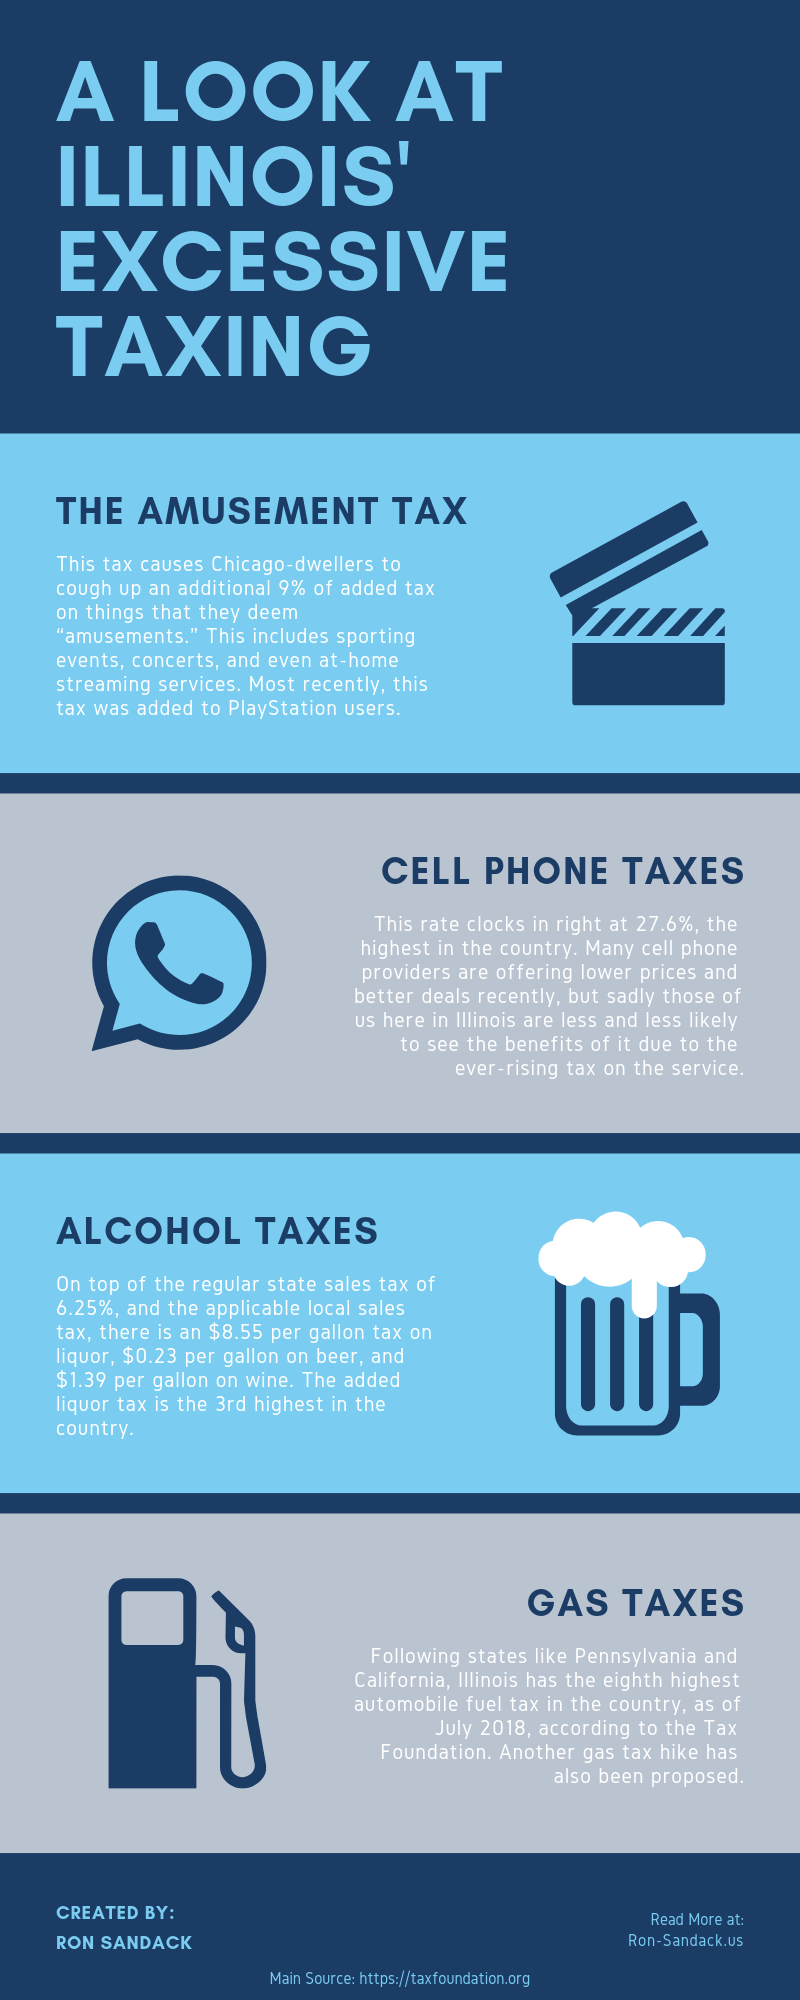 A Look At Illinois' Excessive Taxing Infographic Ron Sandack